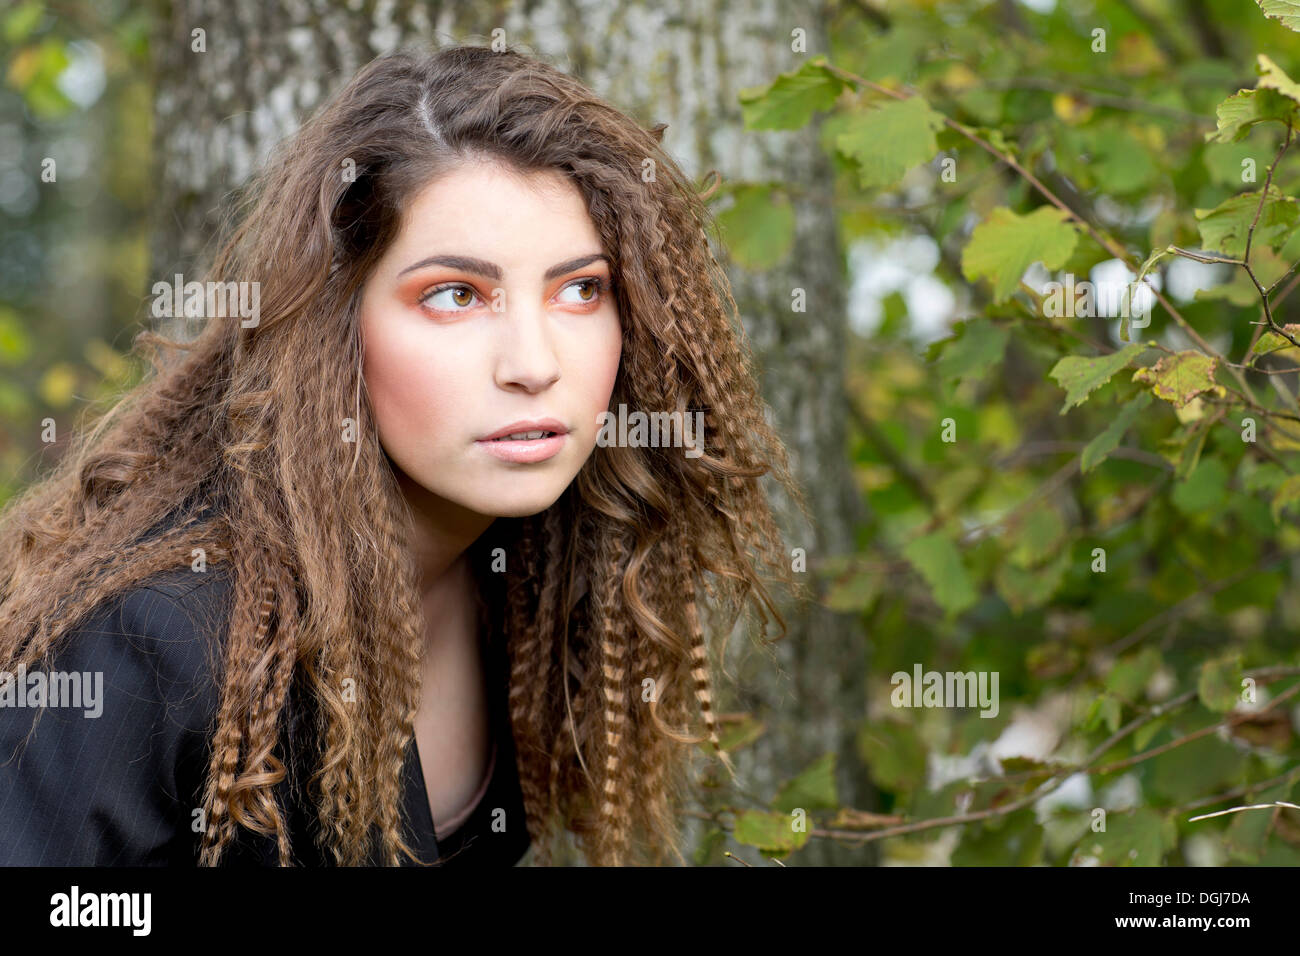 Young woman with long hair in front of a tree, portrait Stock Photo